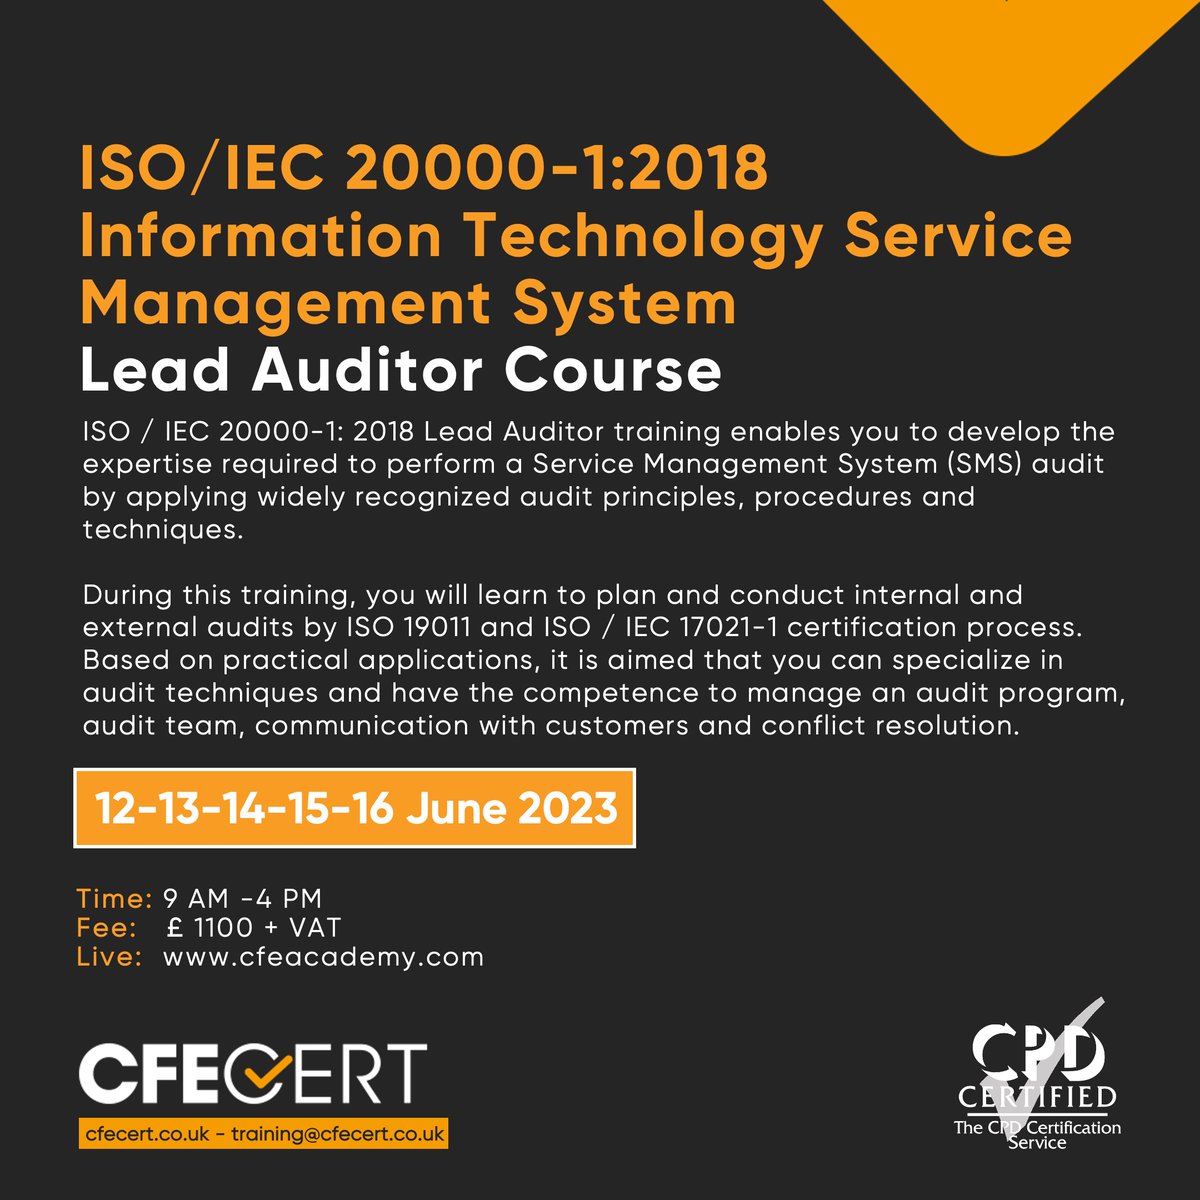 #ITSMS #LeadAuditor course in starting on the 12th of June. Get in touch with us to book your session now! #InfoTech #InformationTechnology